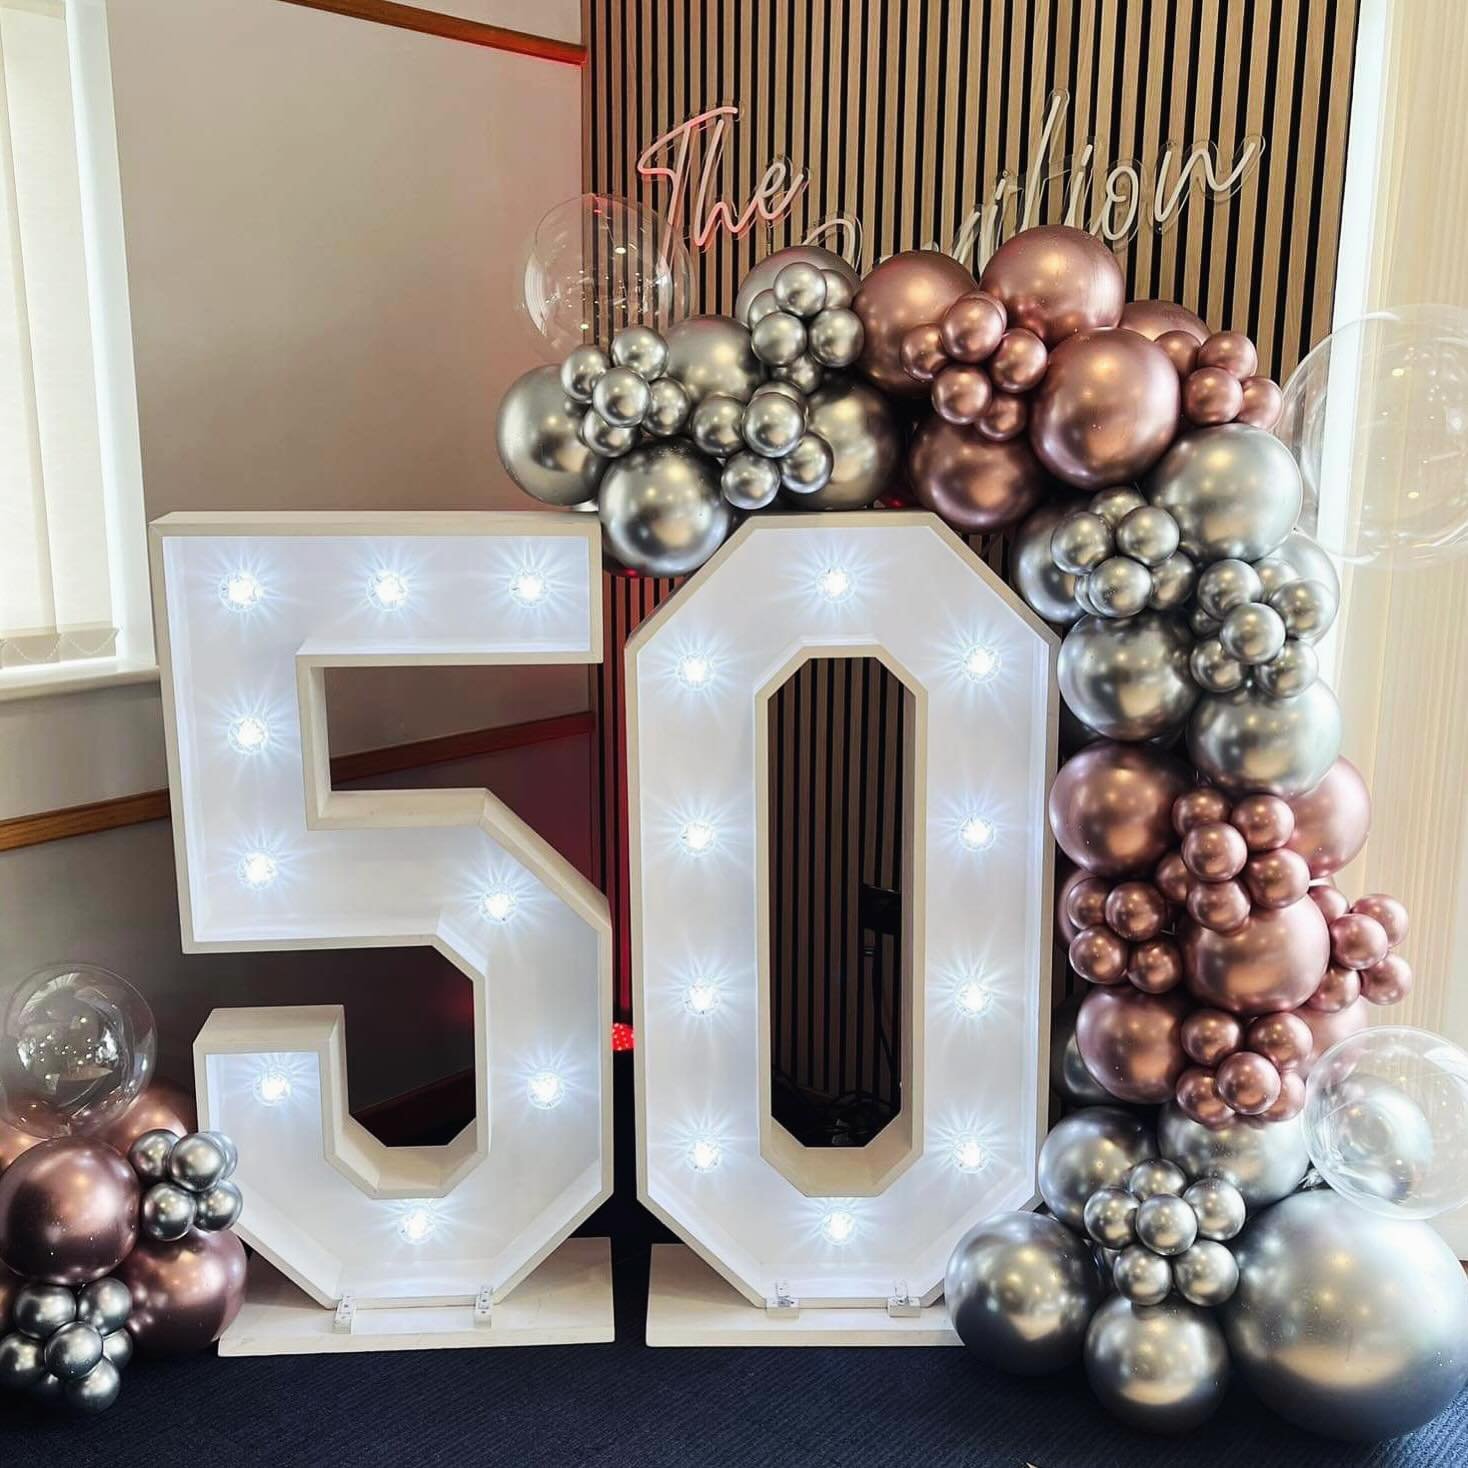 Radiant in Rose Gold! 

Light up numbers by us @mf_iom 
Balloons by @littlebigballoonsiom 

#lightupnumbers #lightup50 #milestonebirthday #party #birthdayparty #birthday #lednumbers